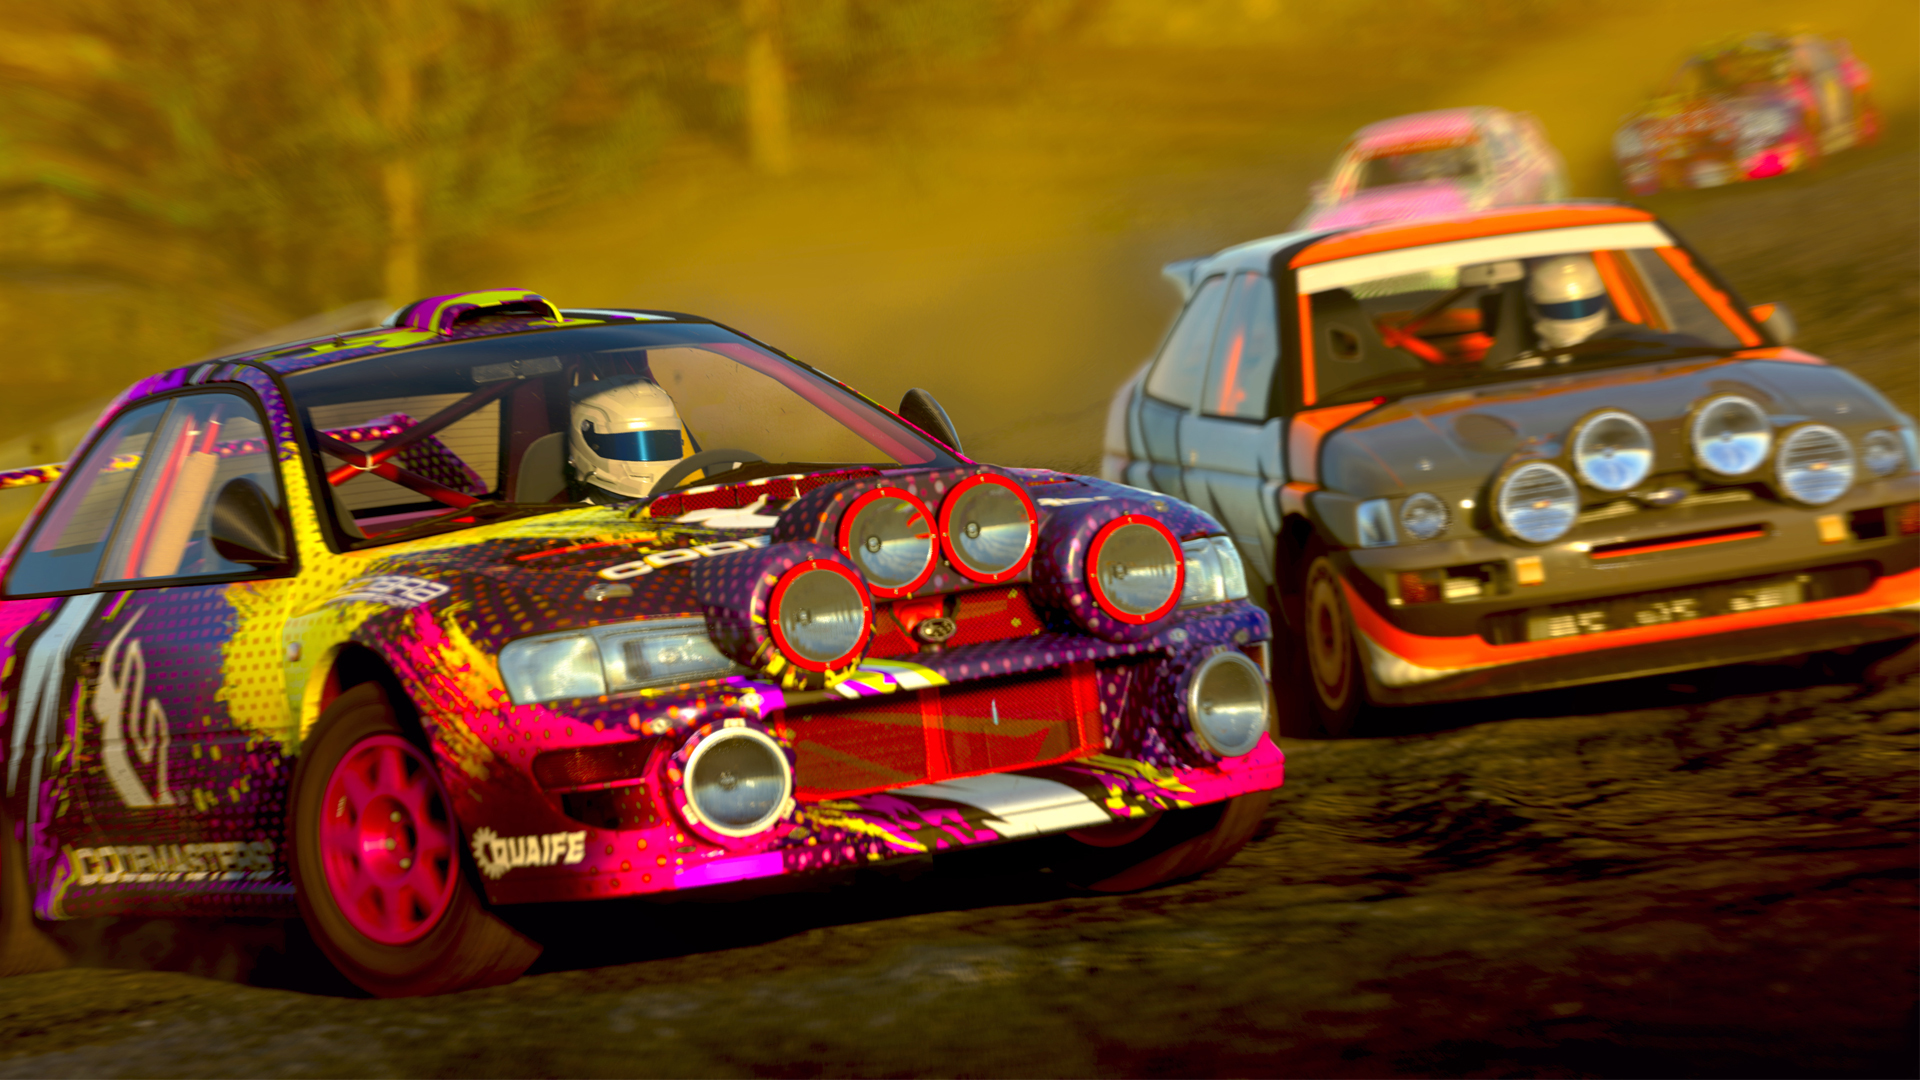 Best racing games: two cars fight it out in Dirt 5